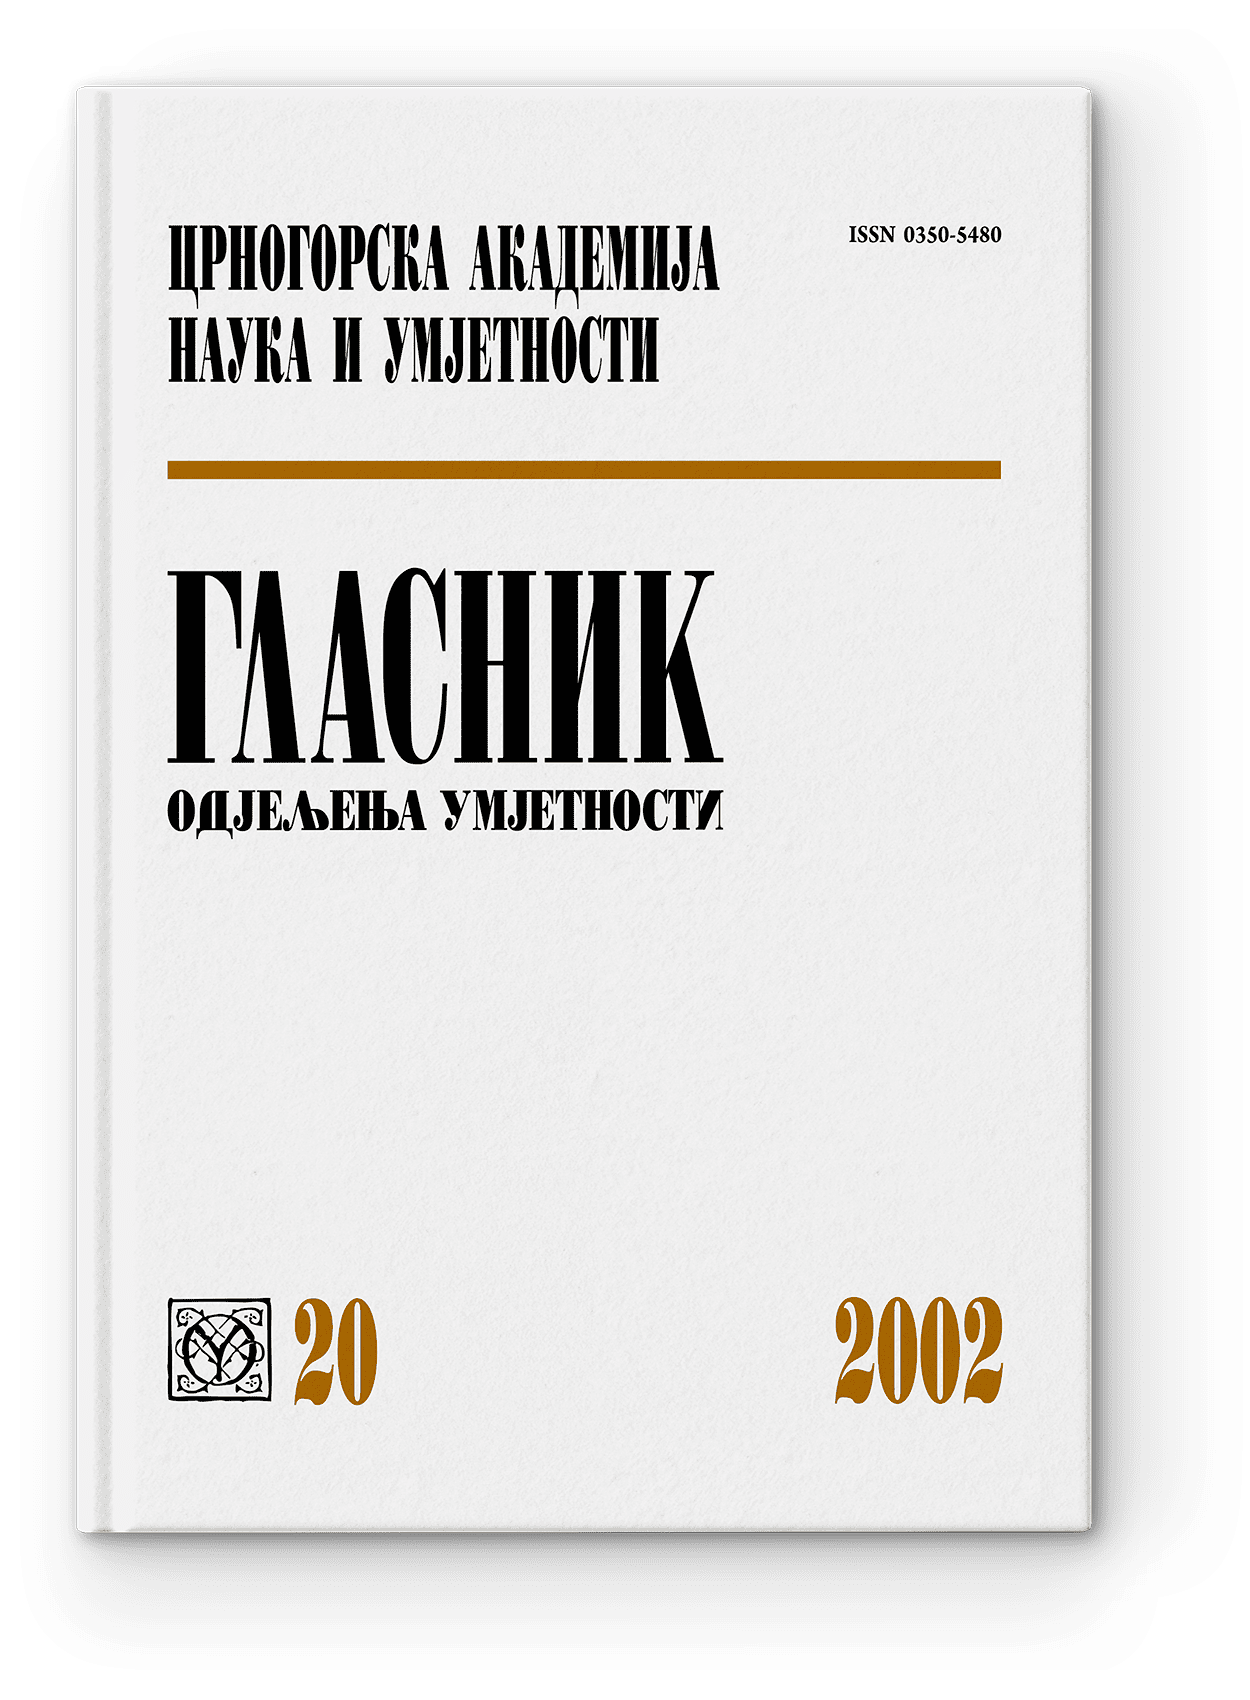 Proceedings of the Department of Arts, 20/2002